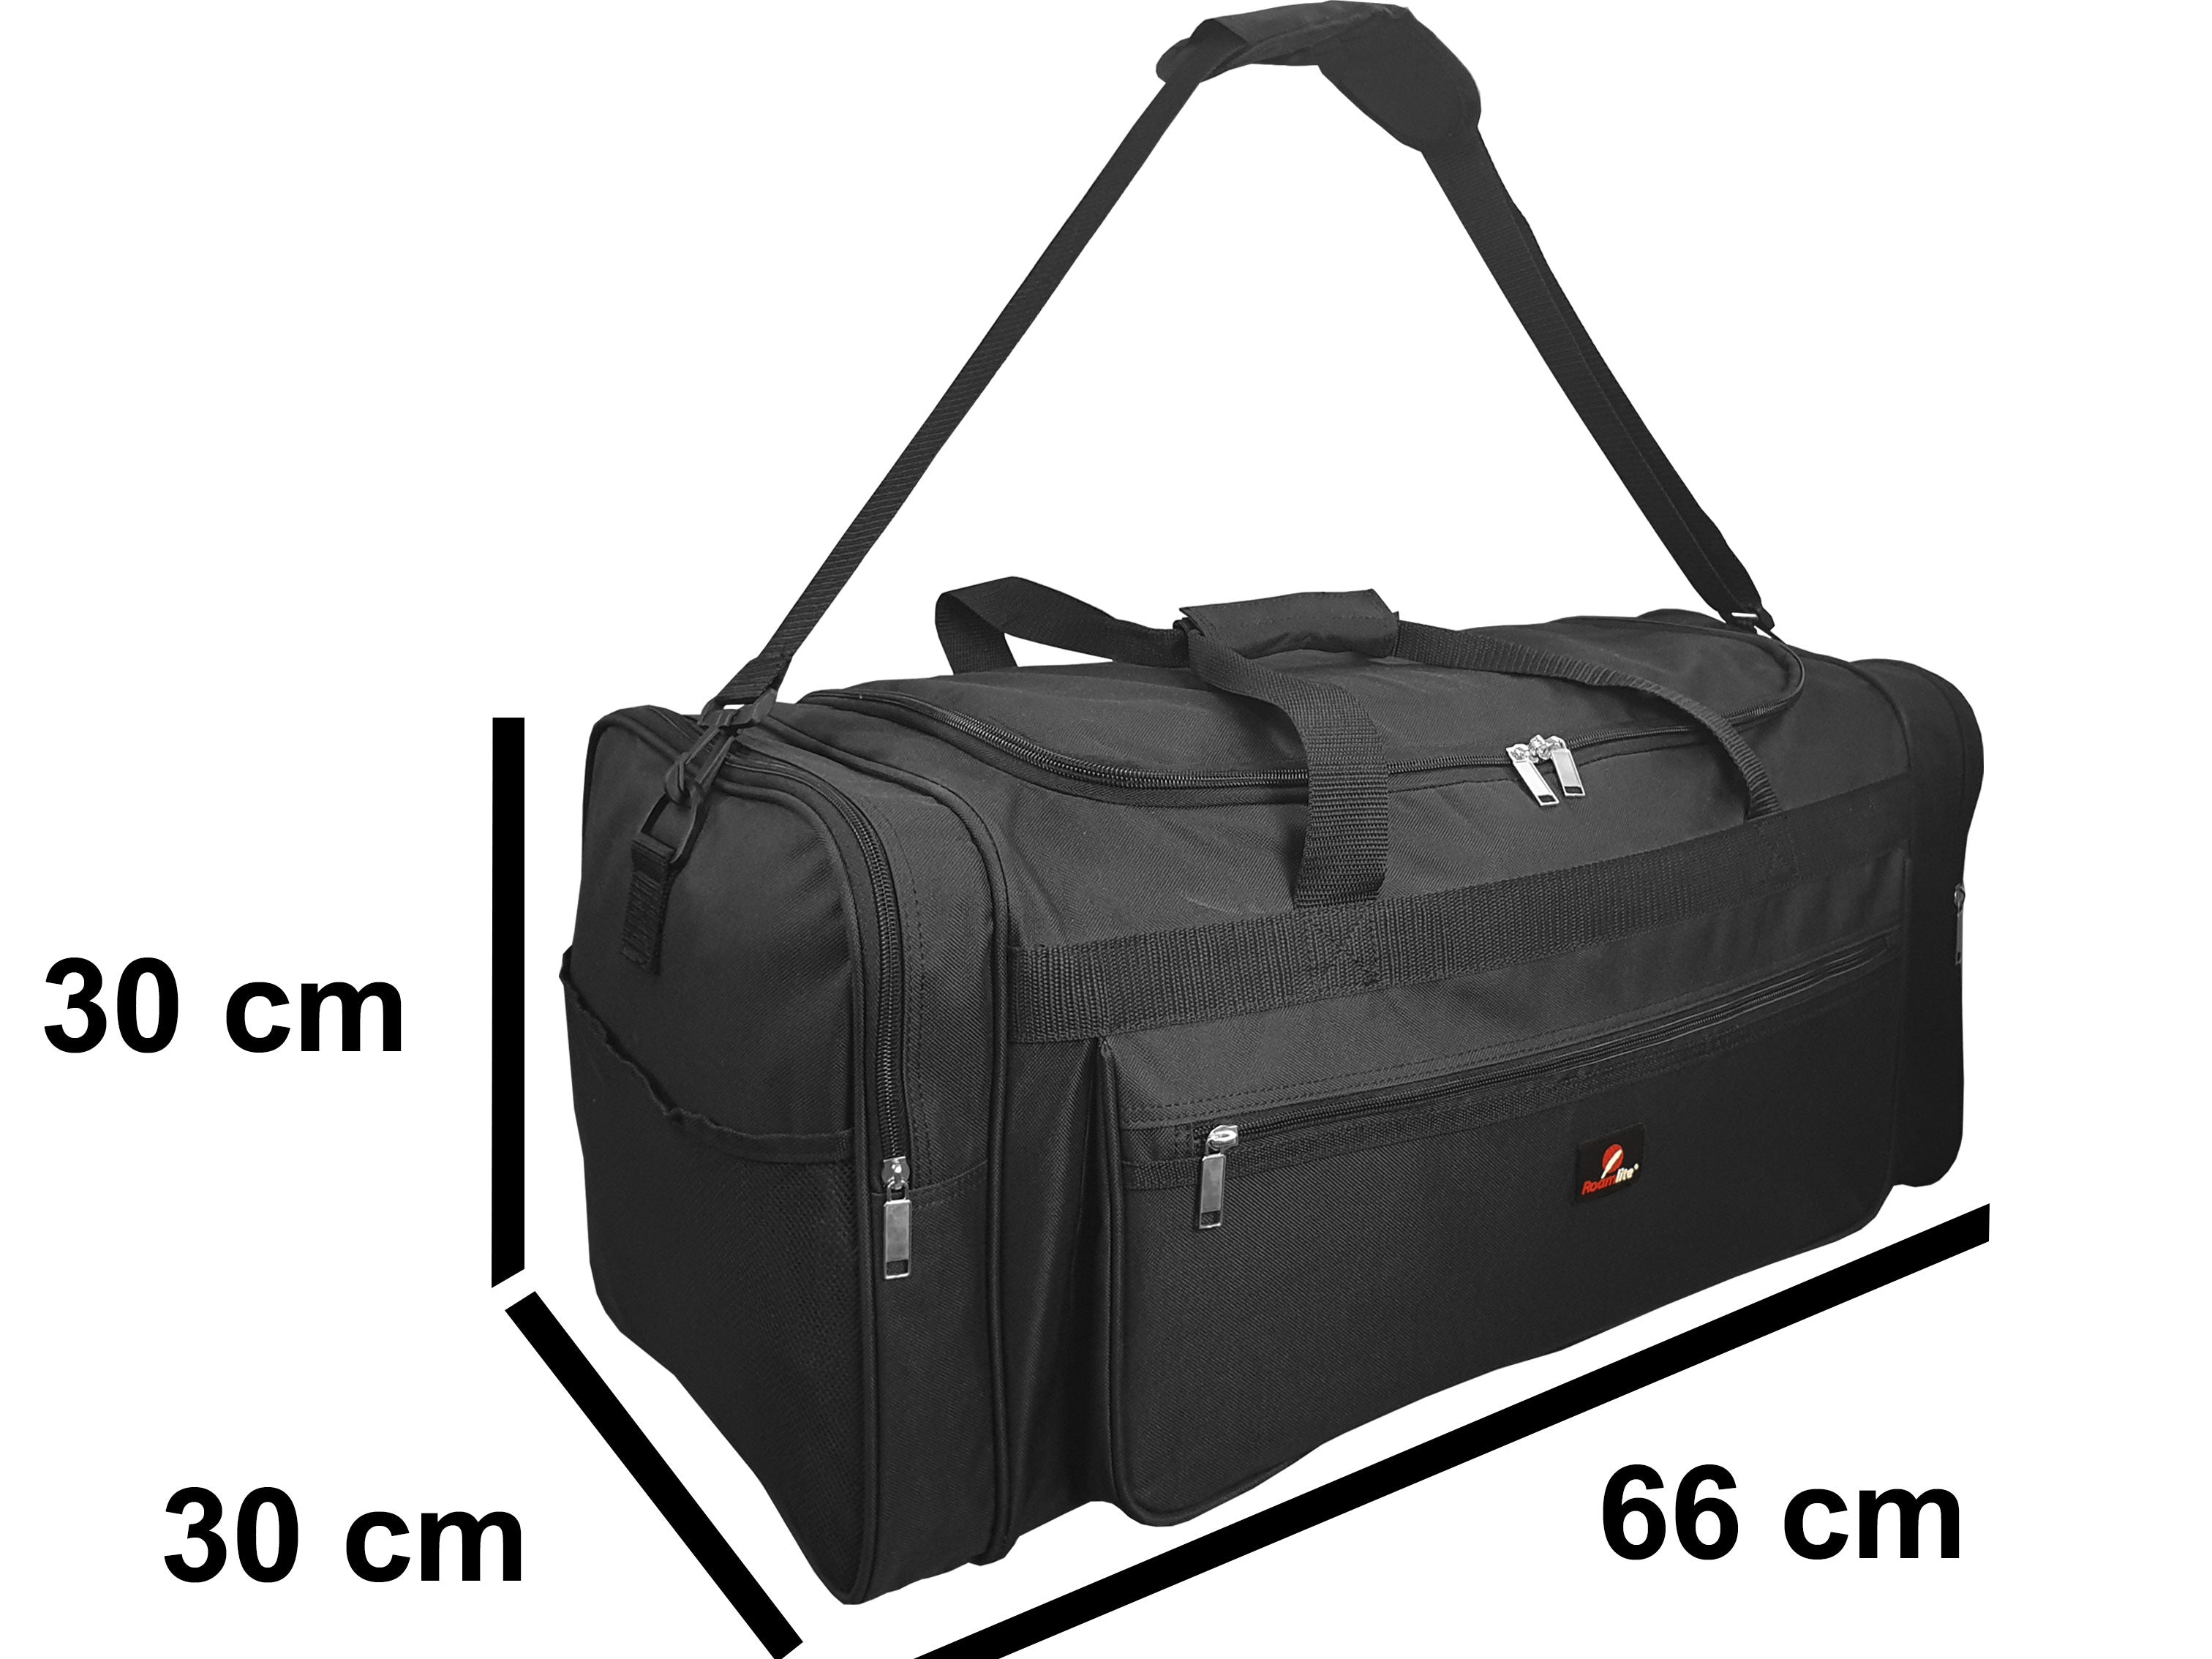 Large Size Weekend Holdall or Overnight Duffle - Ideal Gym Sports Bag - 7Bags